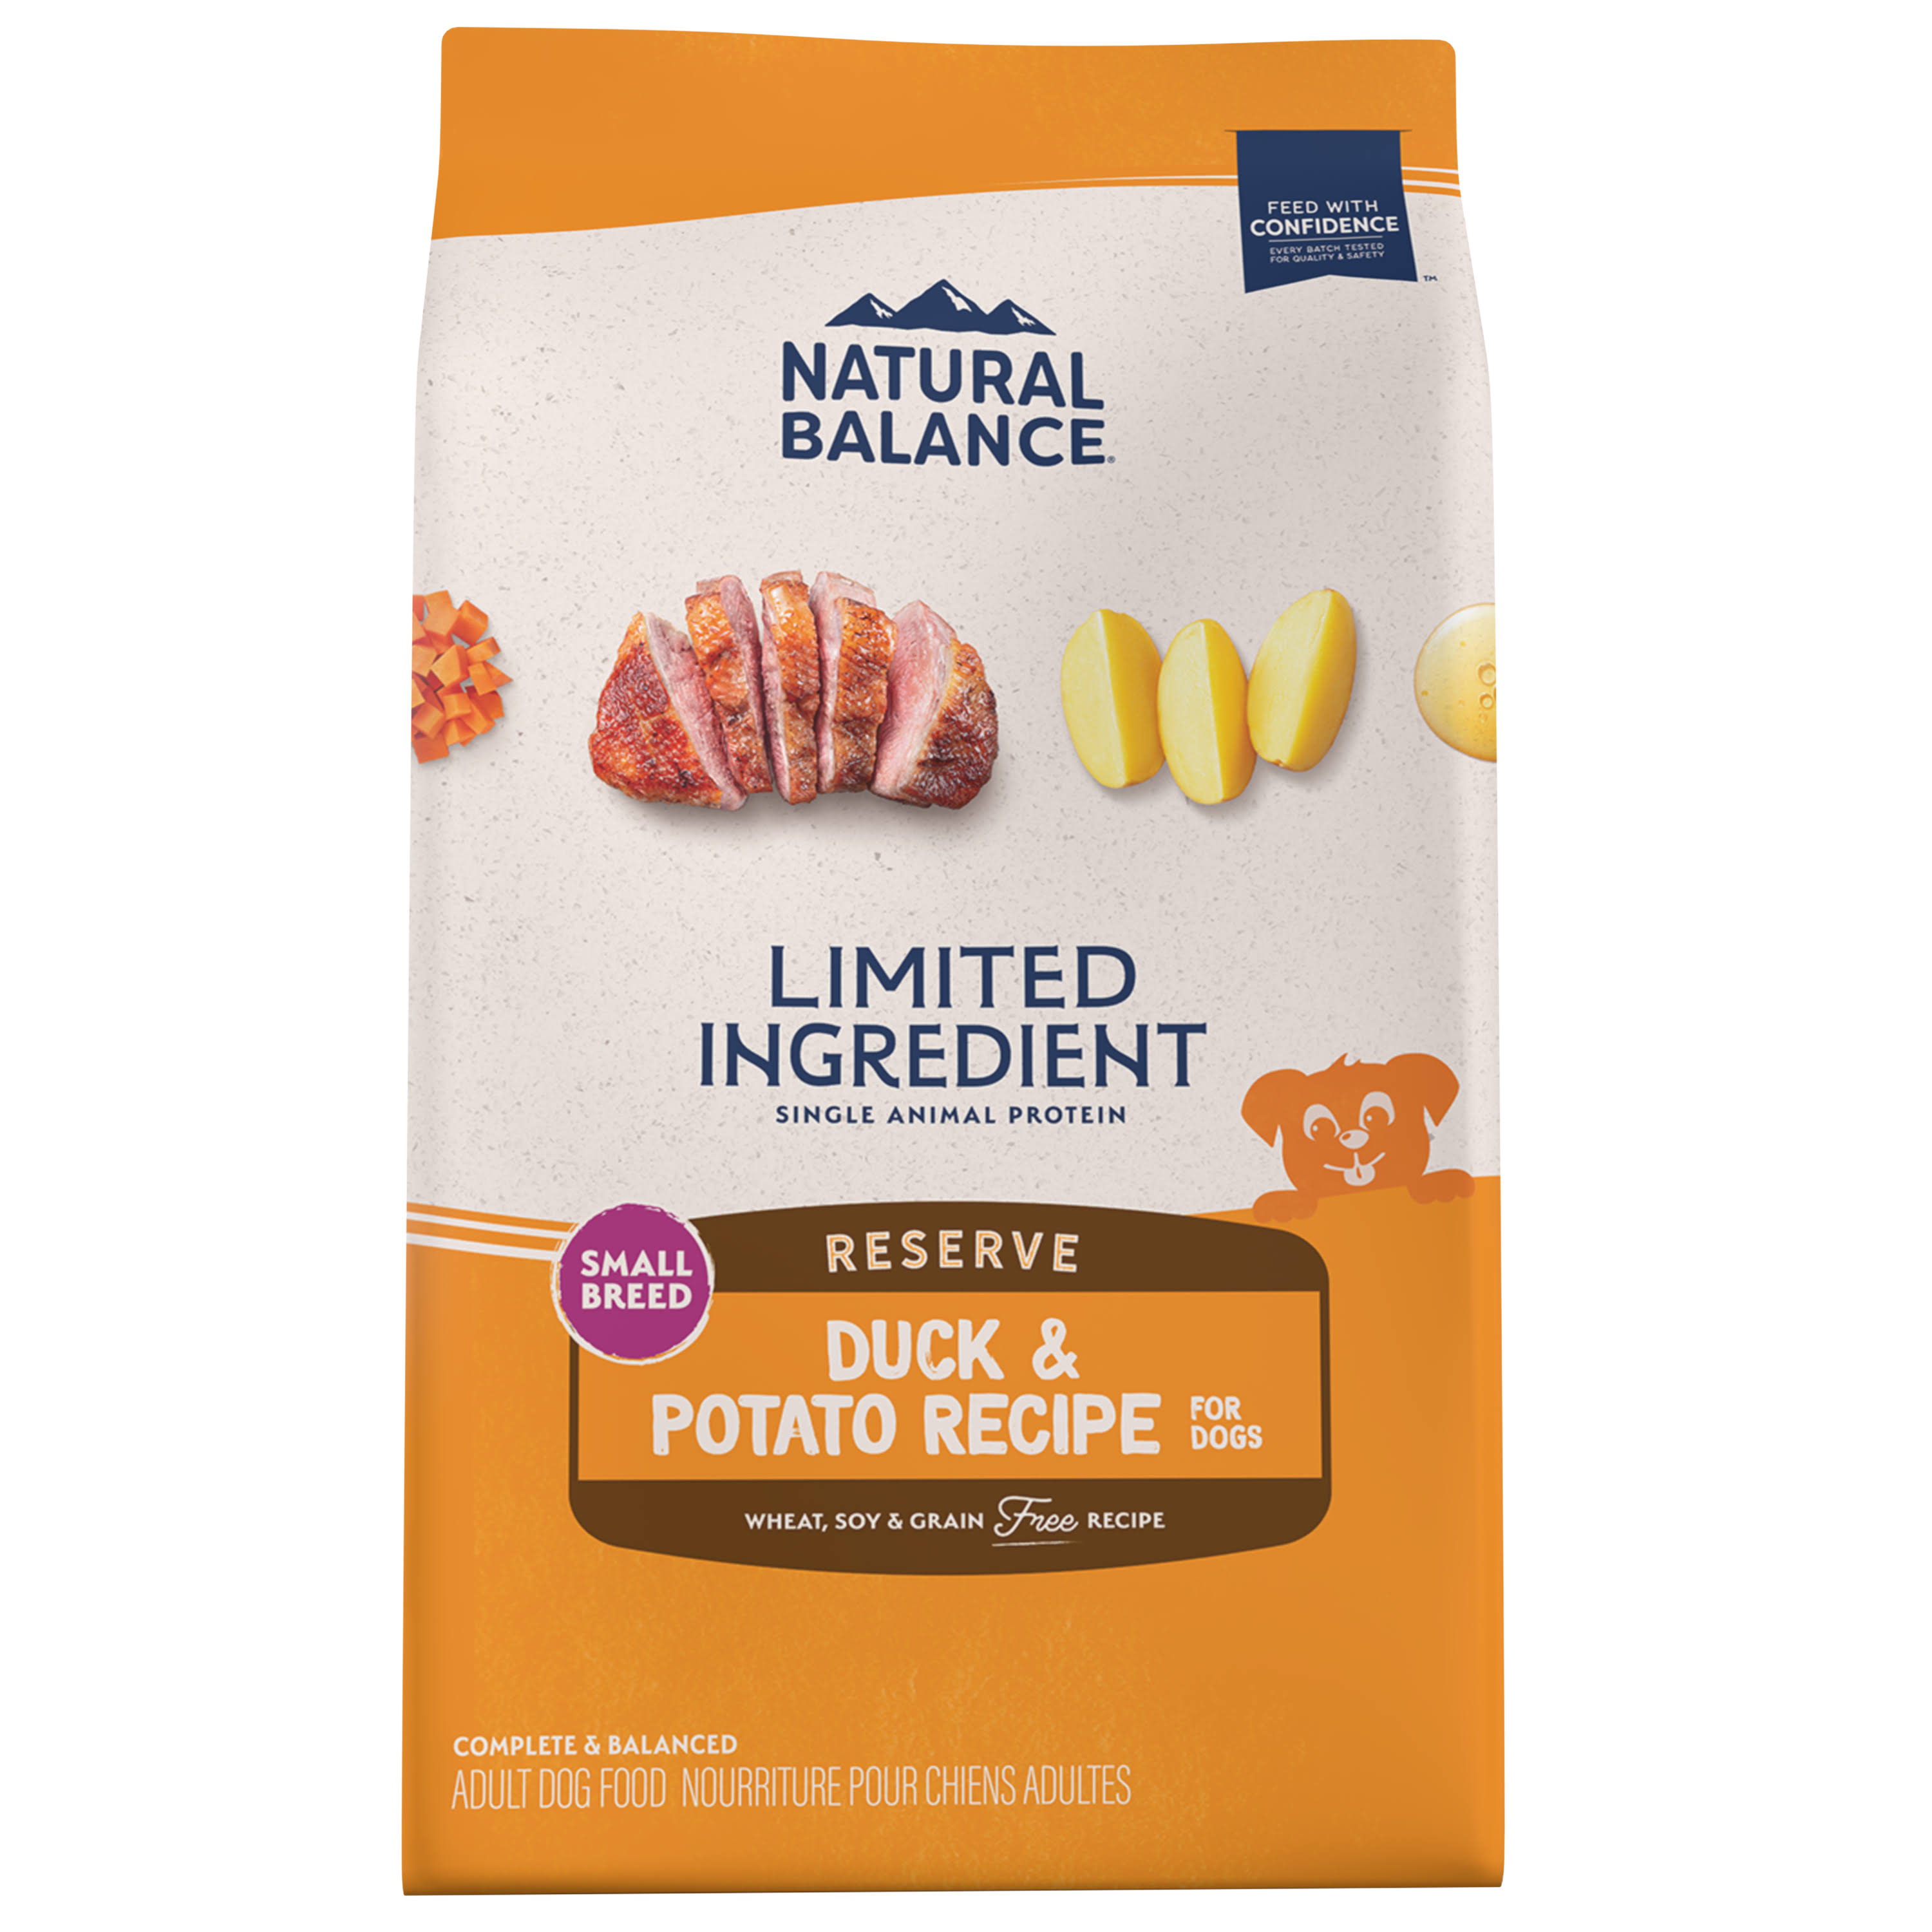 Natural Balance L.I.D. Limited Ingredient Diets Small Breed Bites Dry Dog Food, Duck & Potato Formula, 4 Pounds